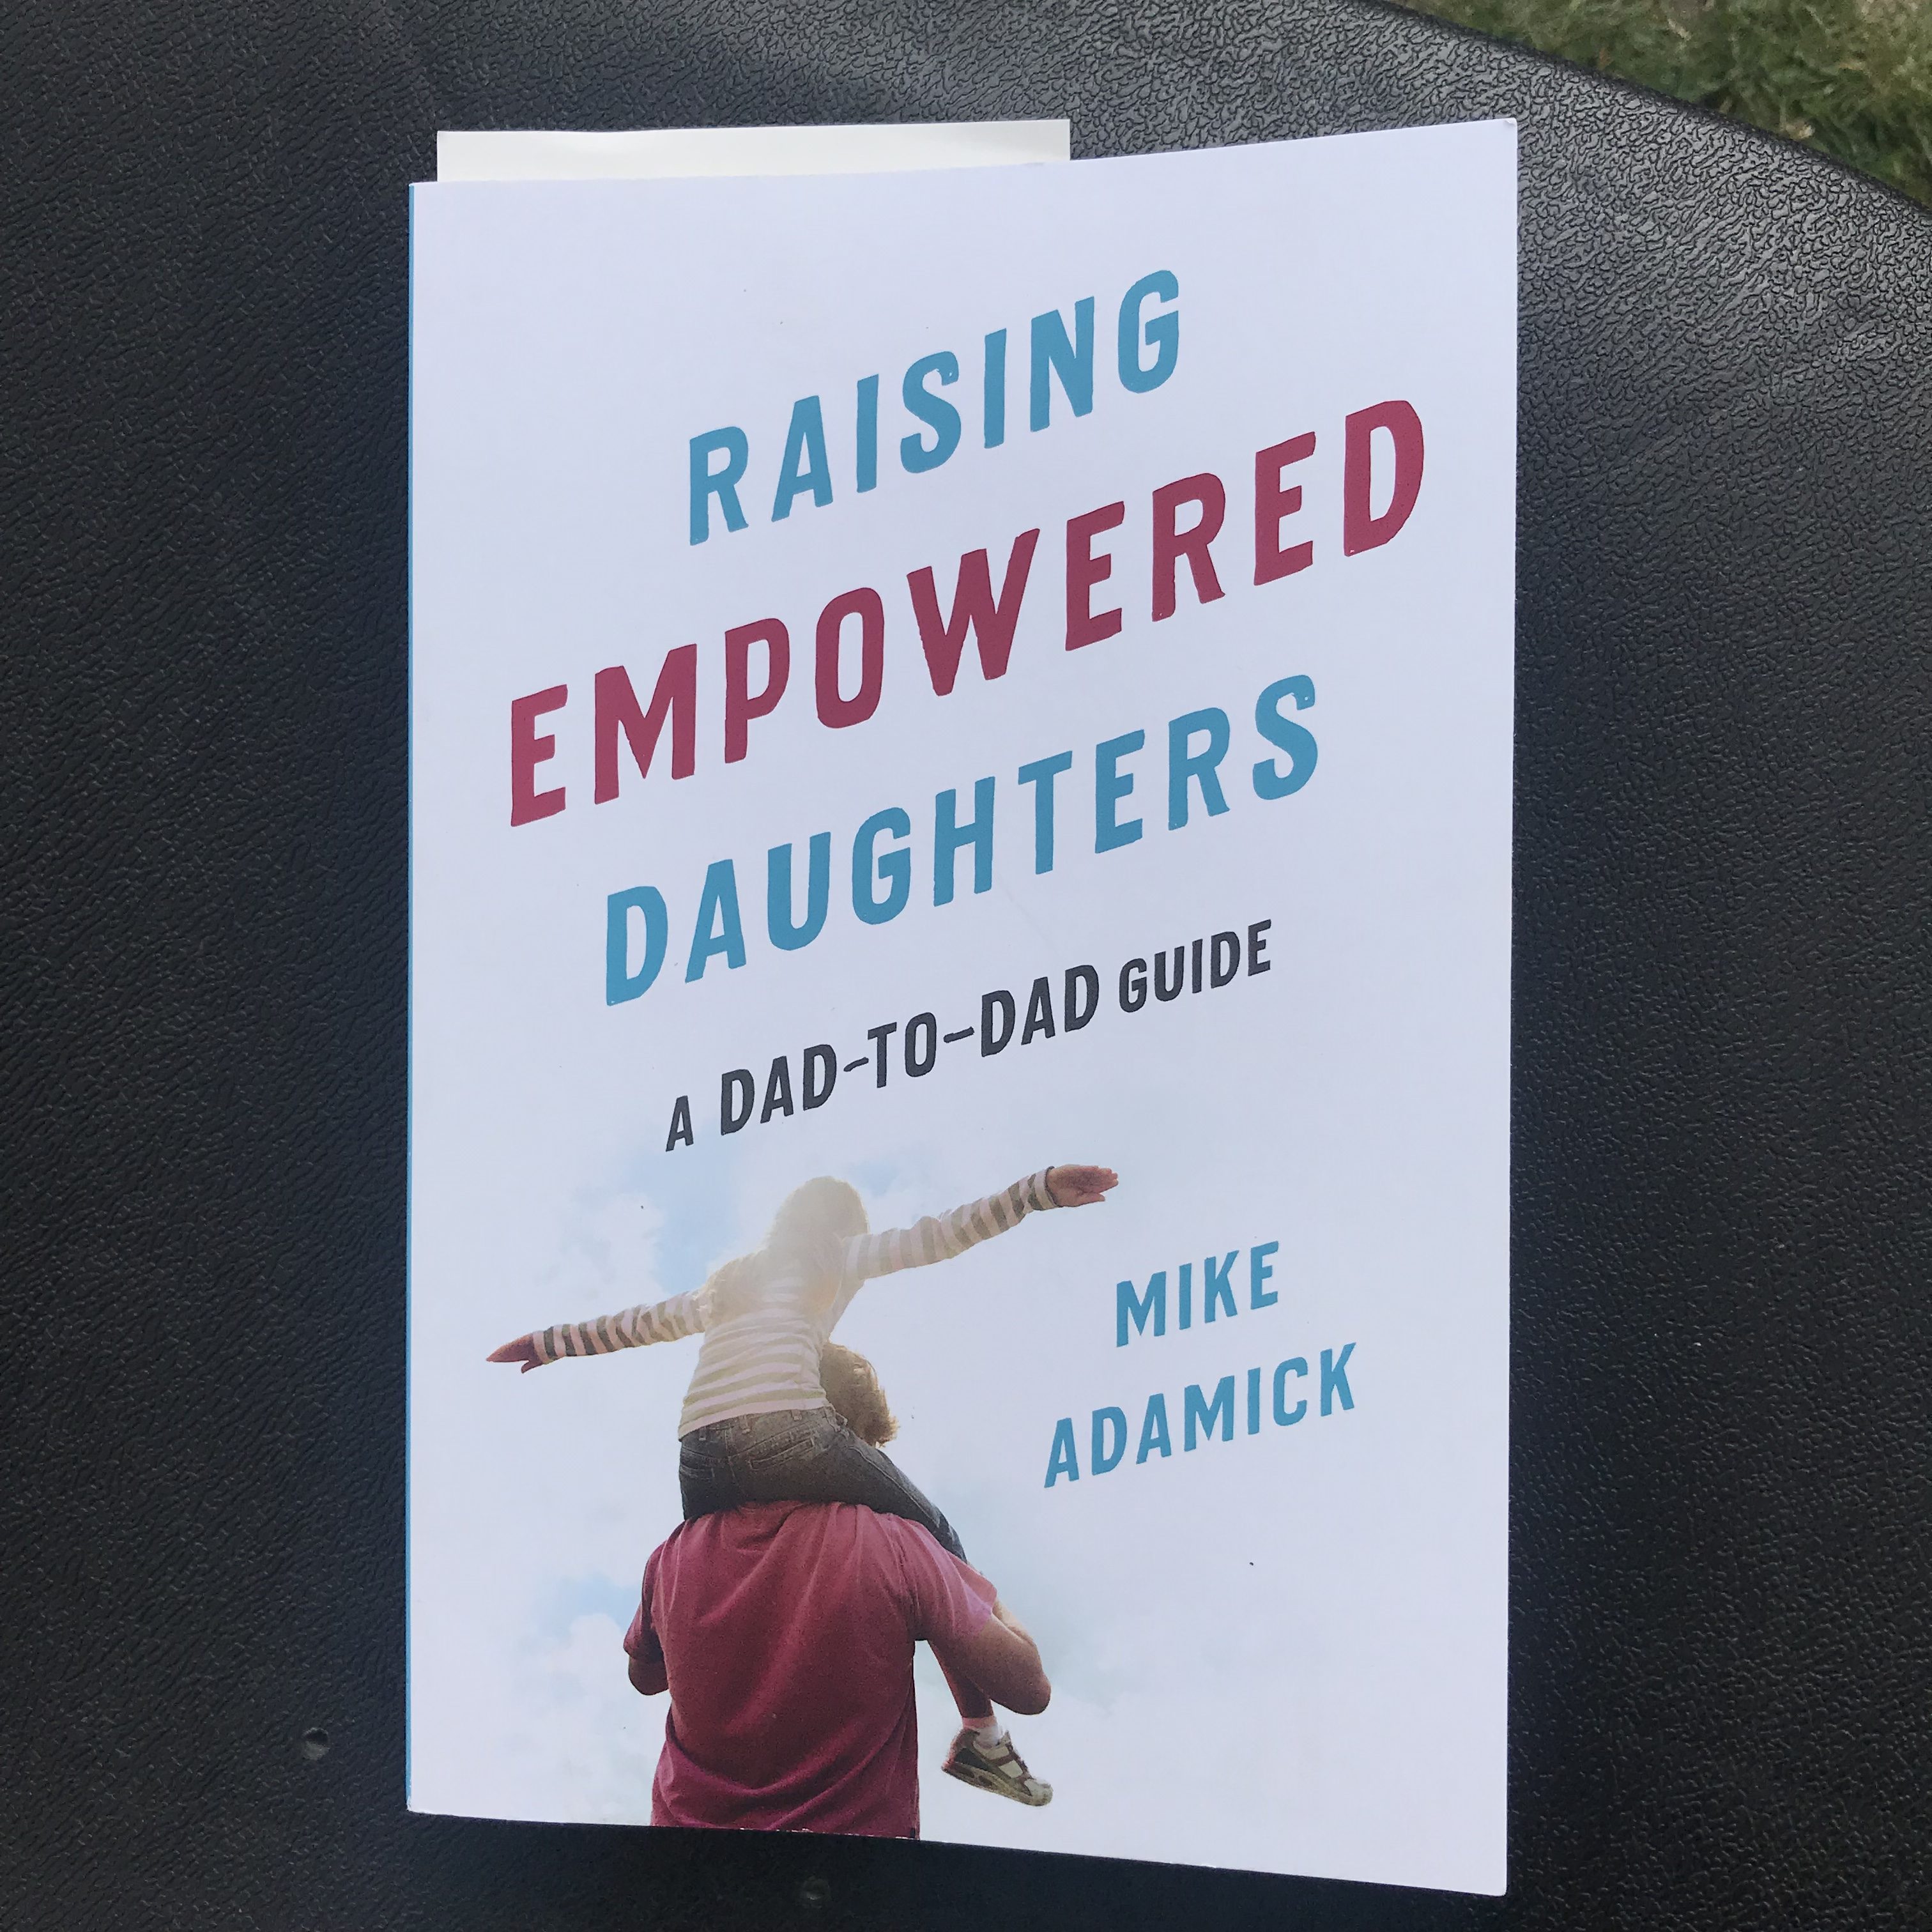 “Raising Empowered Daughters; A Dad-to-Dad Guide”